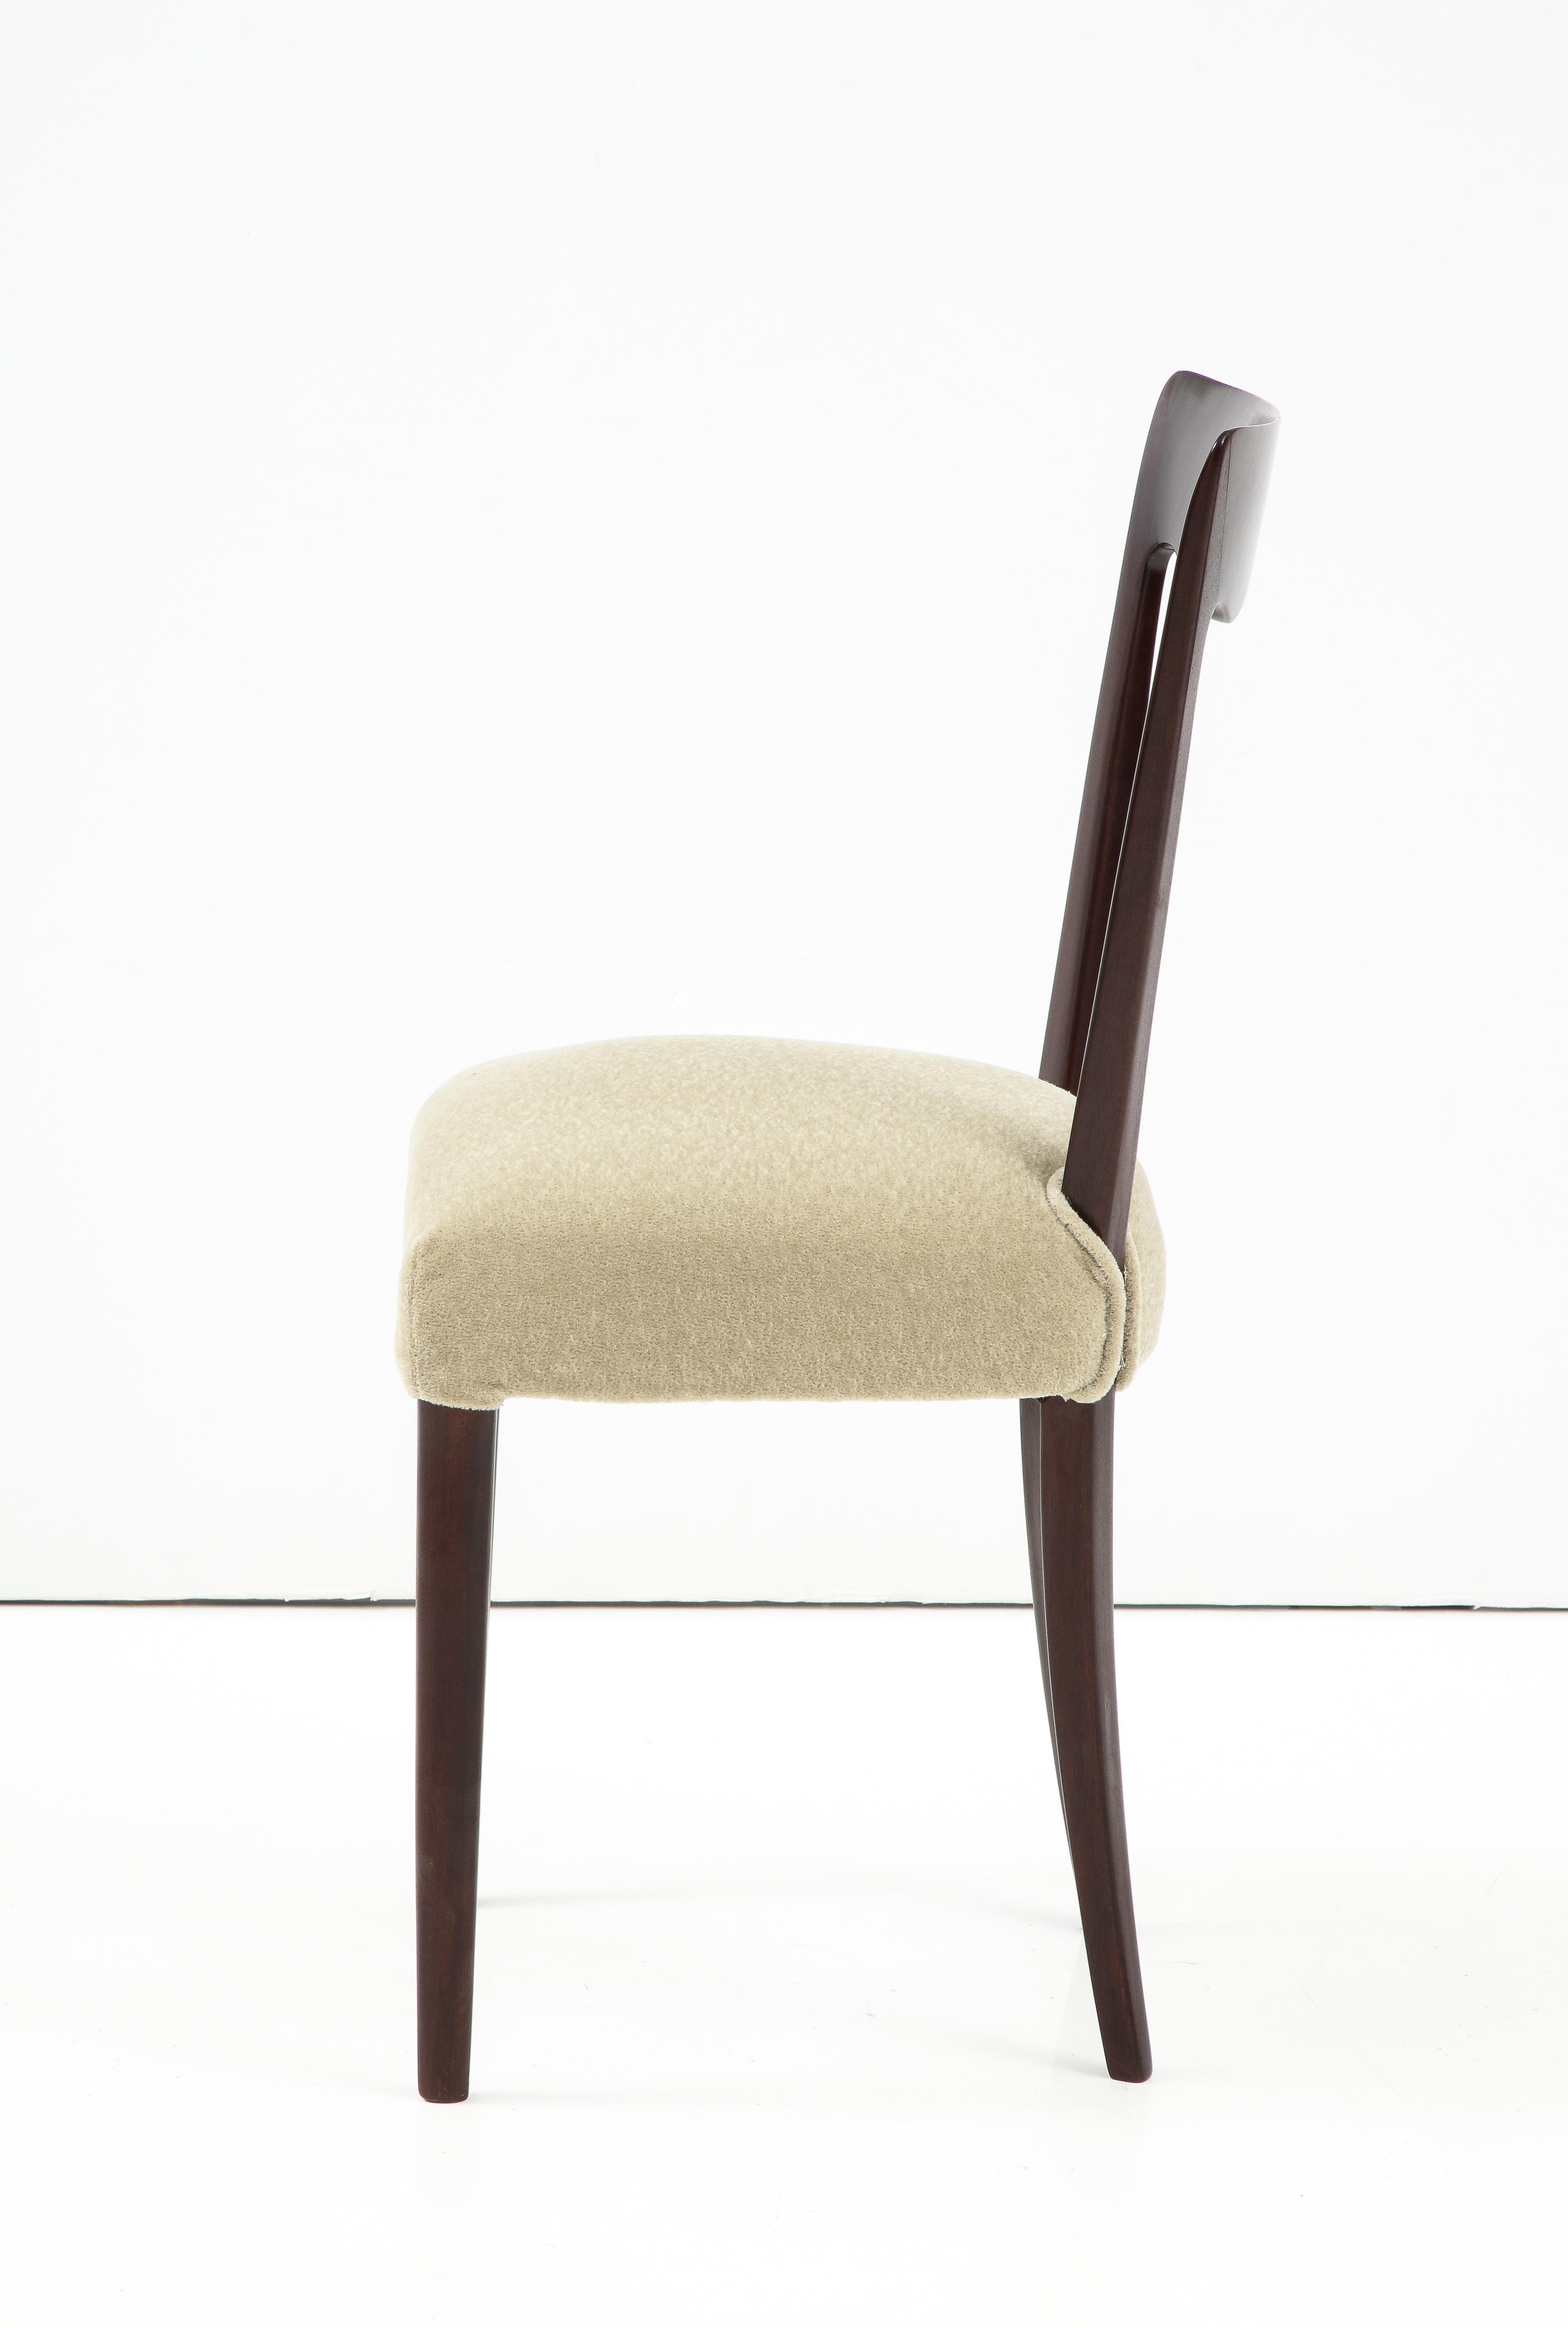 1950's Modernist Italian Dining Chairs In Mohair Upholstery 4